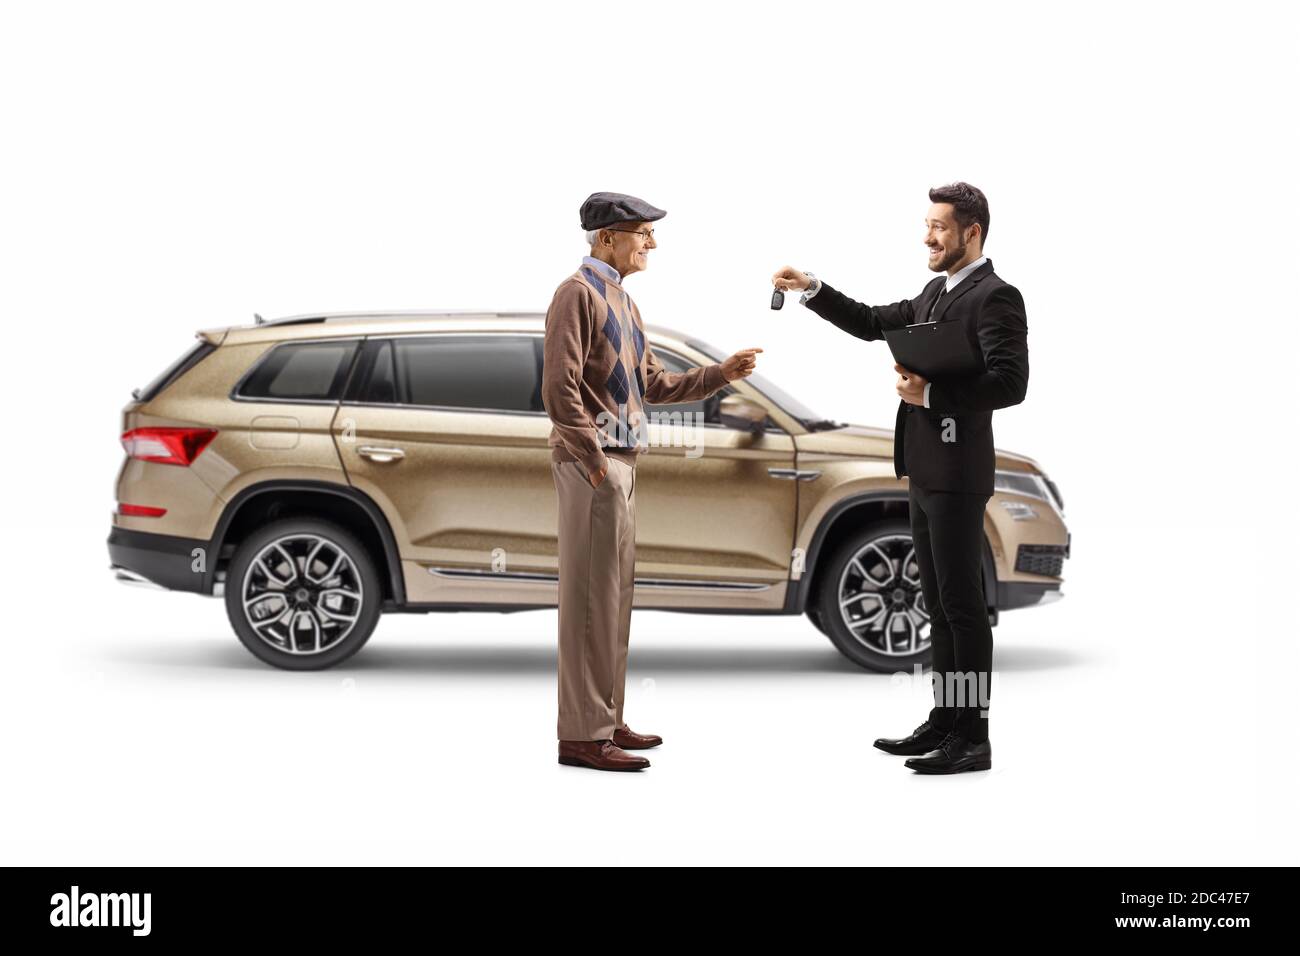 Full length profile shot of a salesman giving car keys from a SUV to an elderly customer isolated on white background Stock Photo